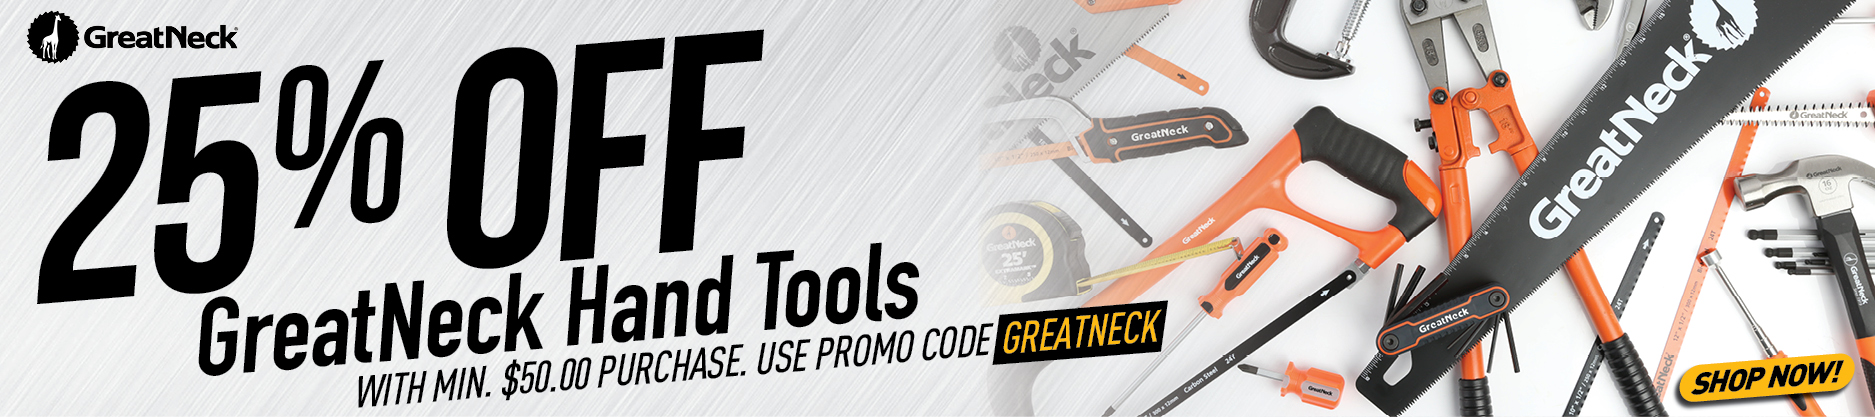 25% Off GreatNeck Hand Tools With Minimum $50 Purchase